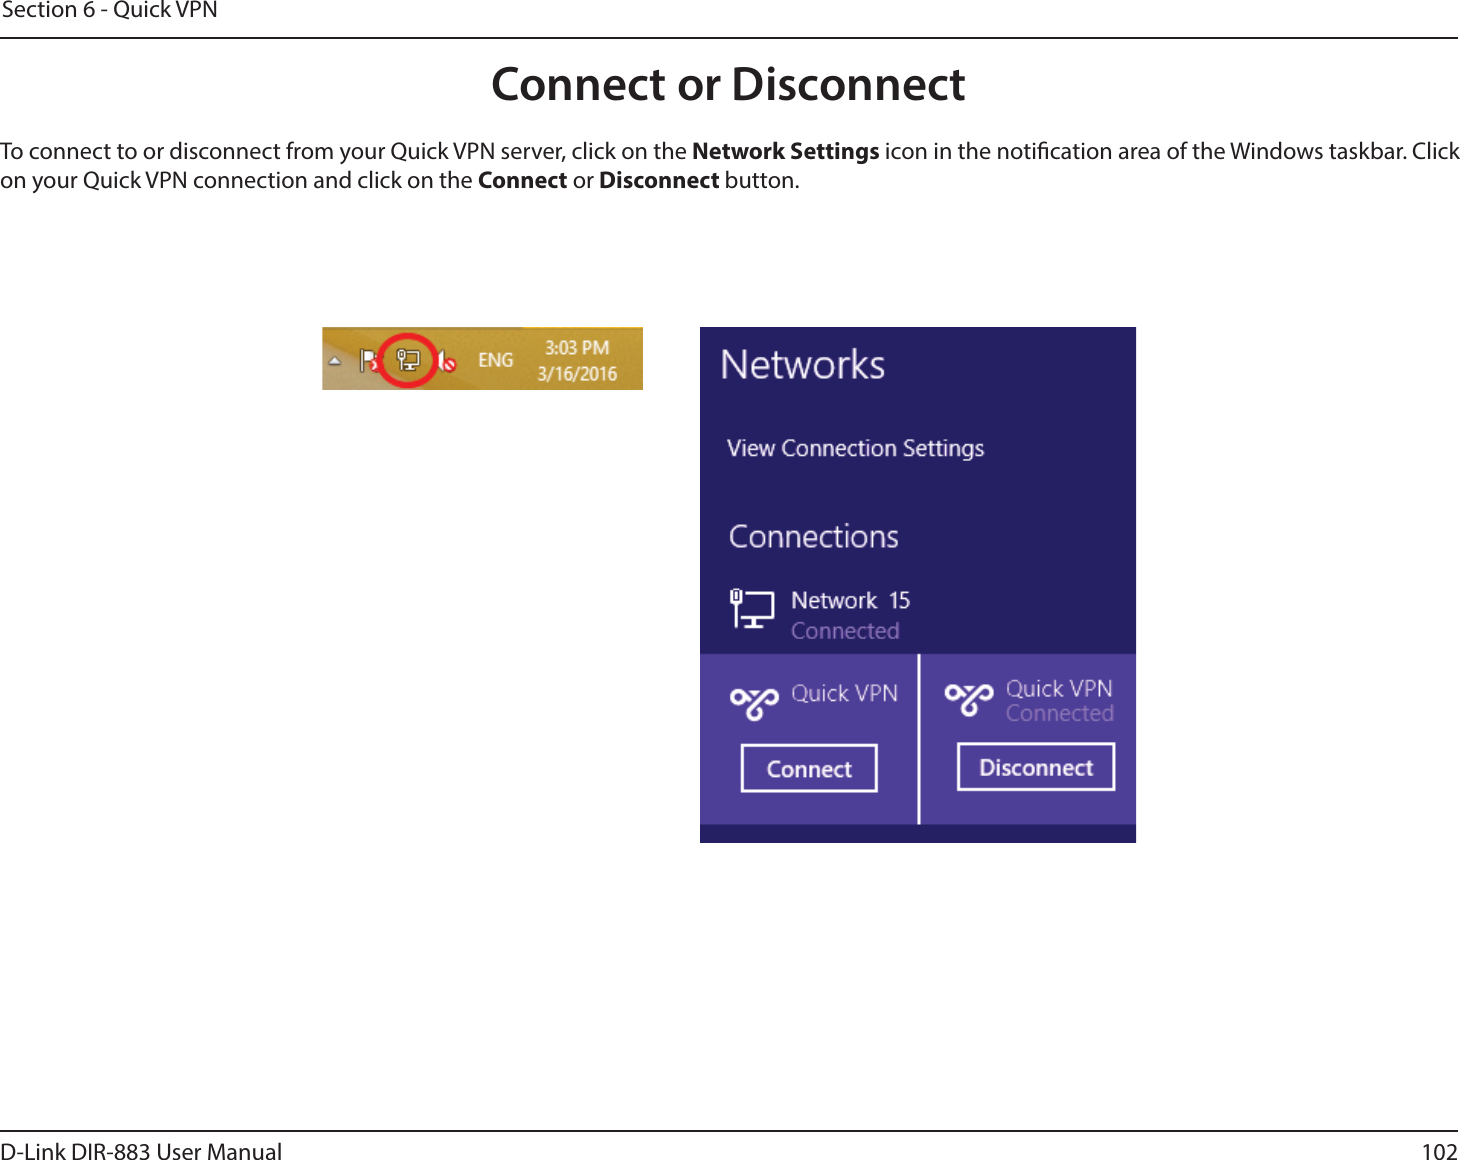 102D-Link DIR-883 User ManualSection 6 - Quick VPNConnect or DisconnectTo connect to or disconnect from your Quick VPN server, click on the Network Settings icon in the notication area of the Windows taskbar. Click on your Quick VPN connection and click on the Connect or Disconnect button.